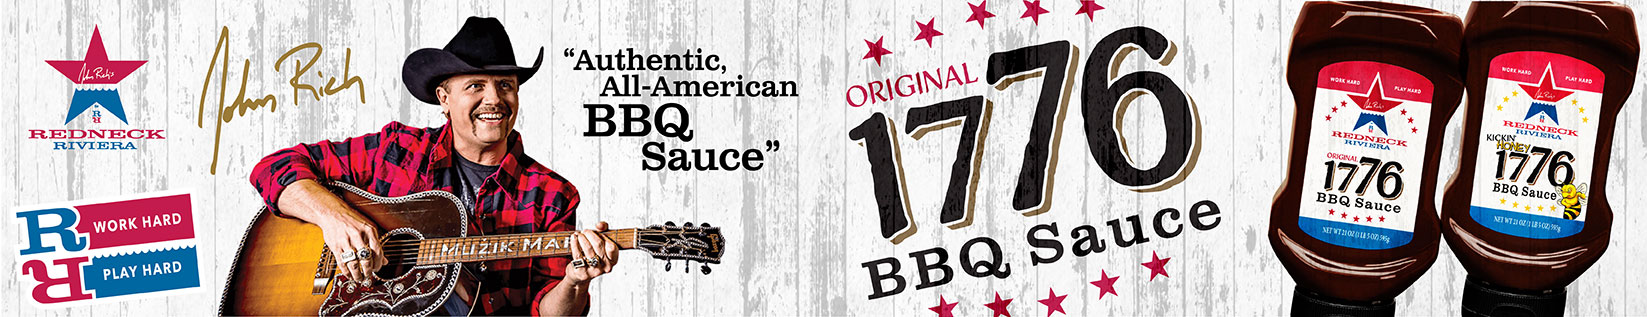 Image of John Rich playing the guitar along with two bottlles of 1776 BBQ Sauce promoting this new barbecue sauce